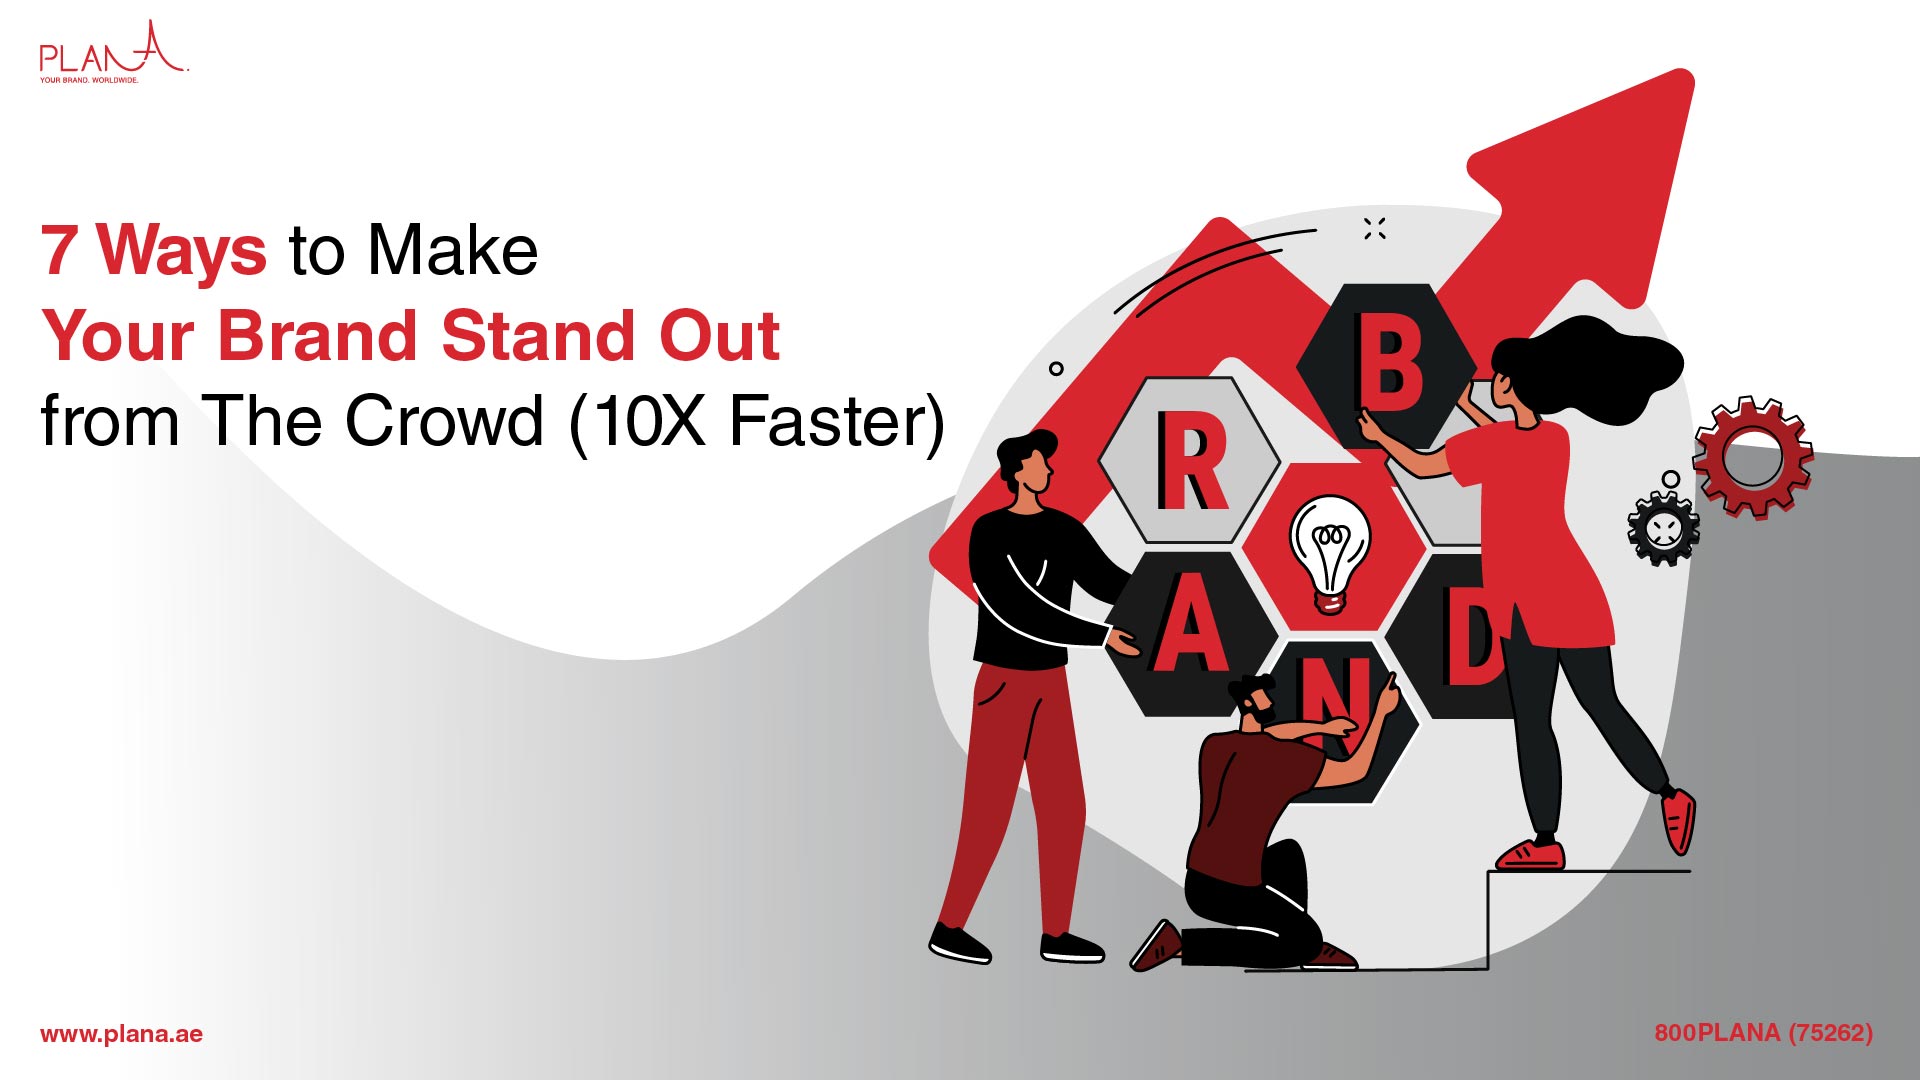 7 Ways to Make Your Brand Stand Out from The Crowd (10X Faster)